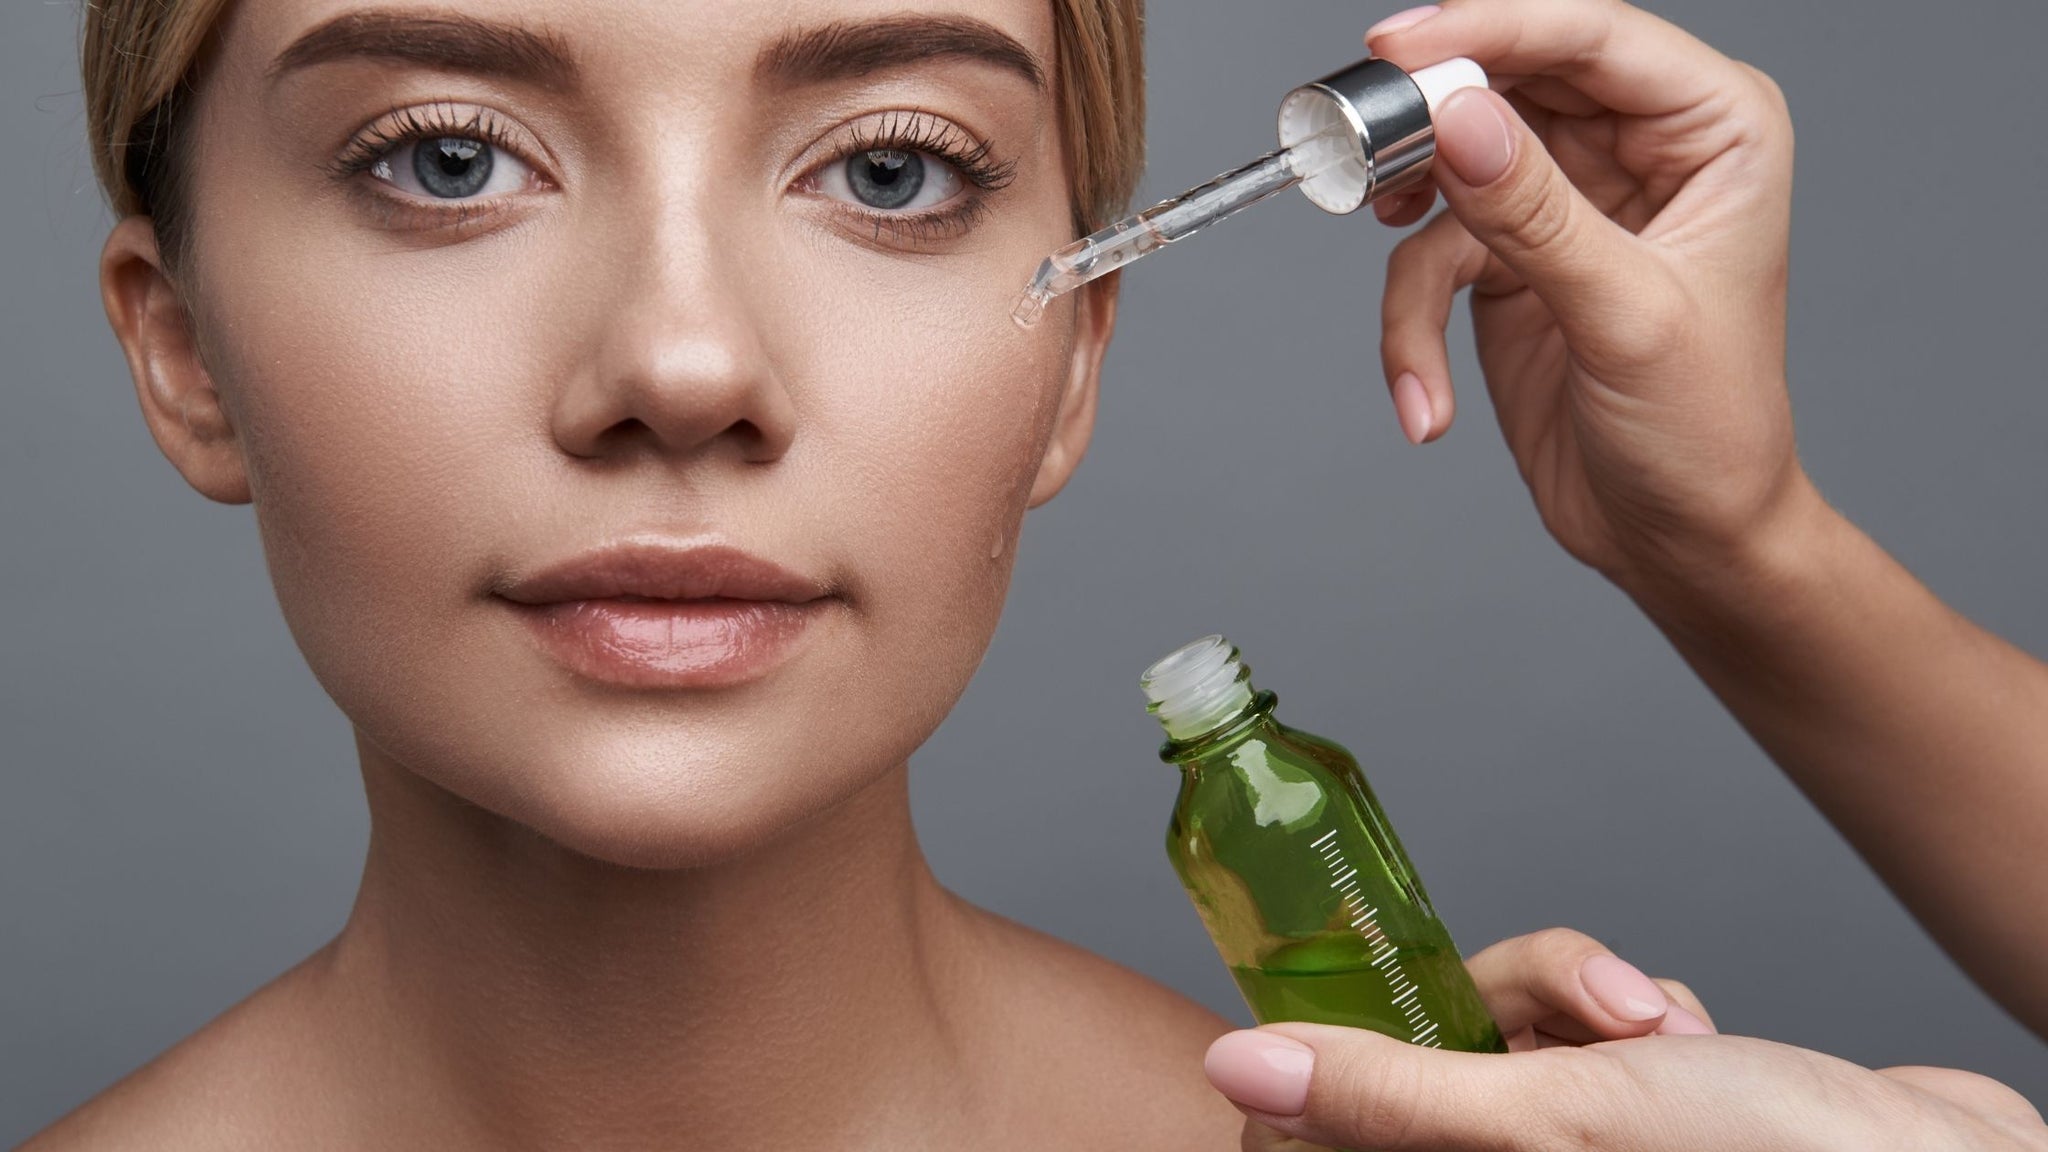 How to layer your skincare products toners, serums and moisturizers correctly